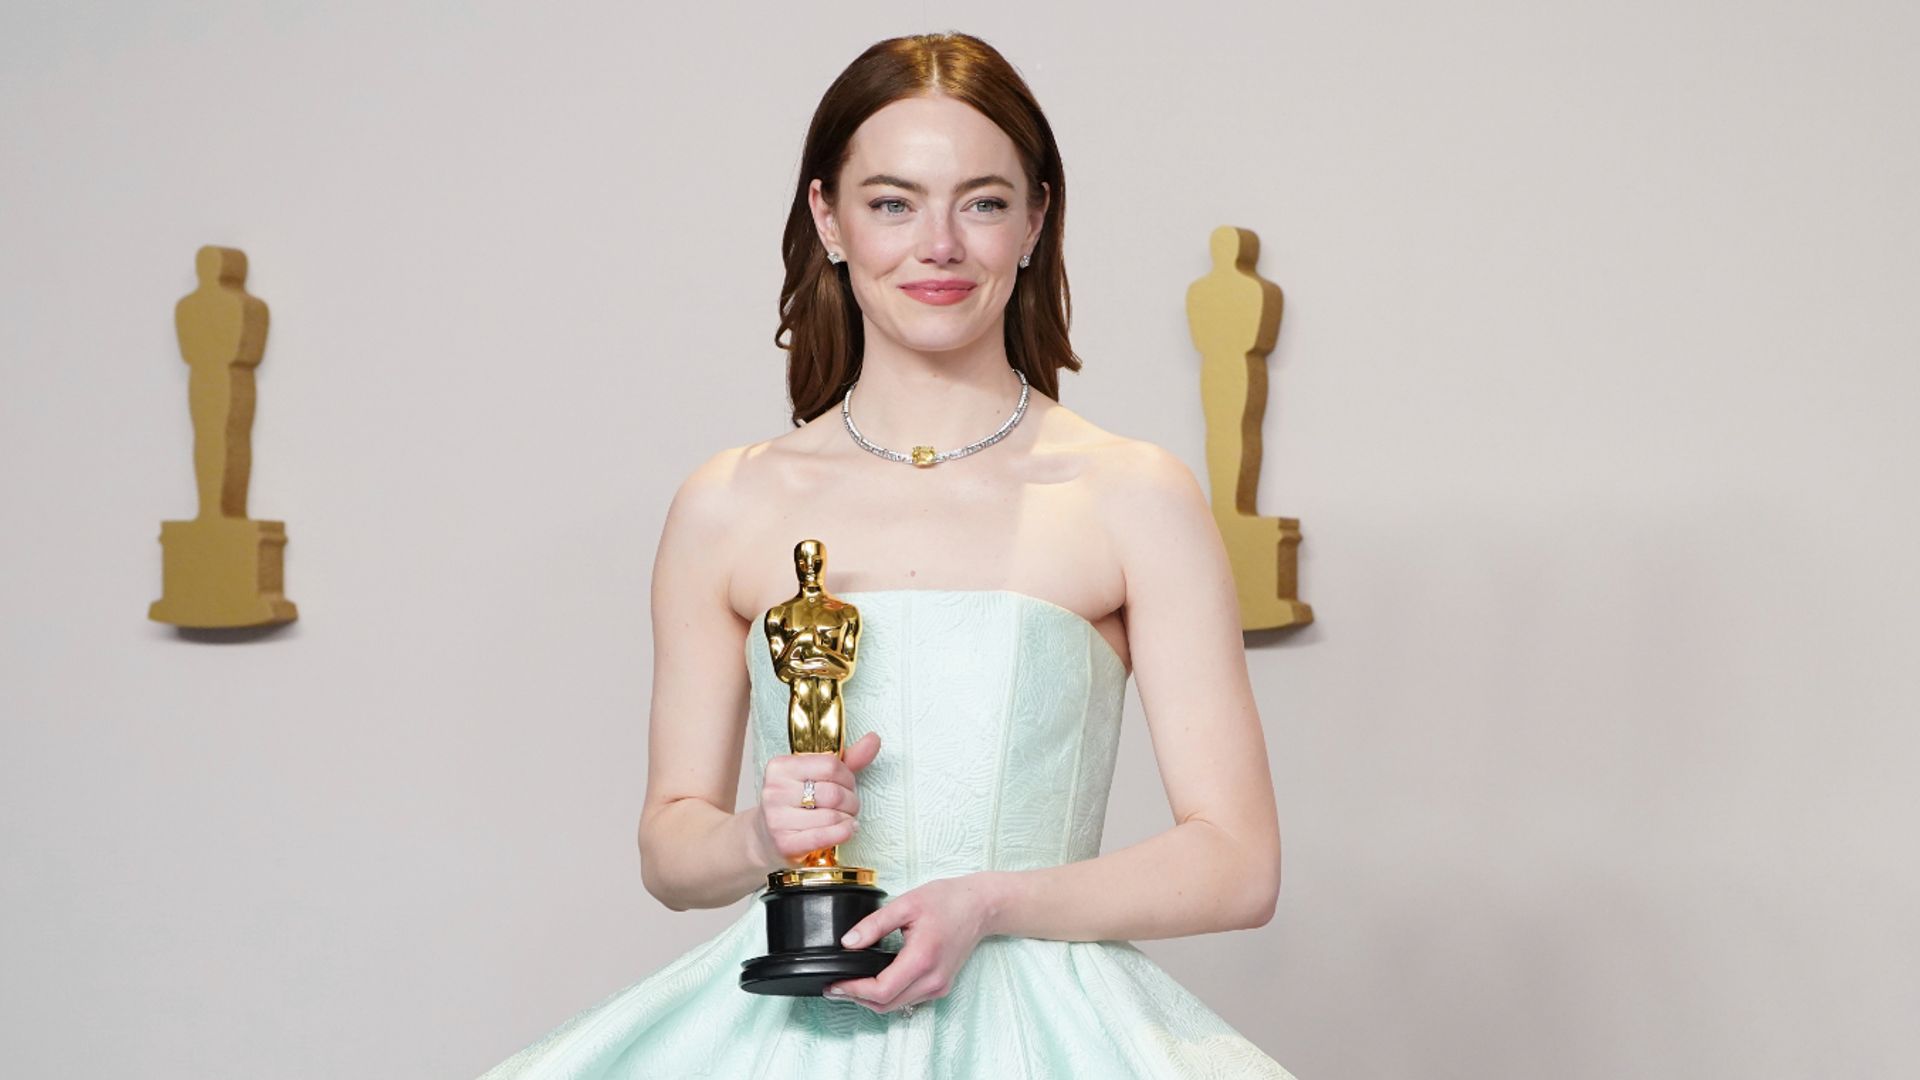 Actress Emma Stone says she 'would like to be' called by her real name